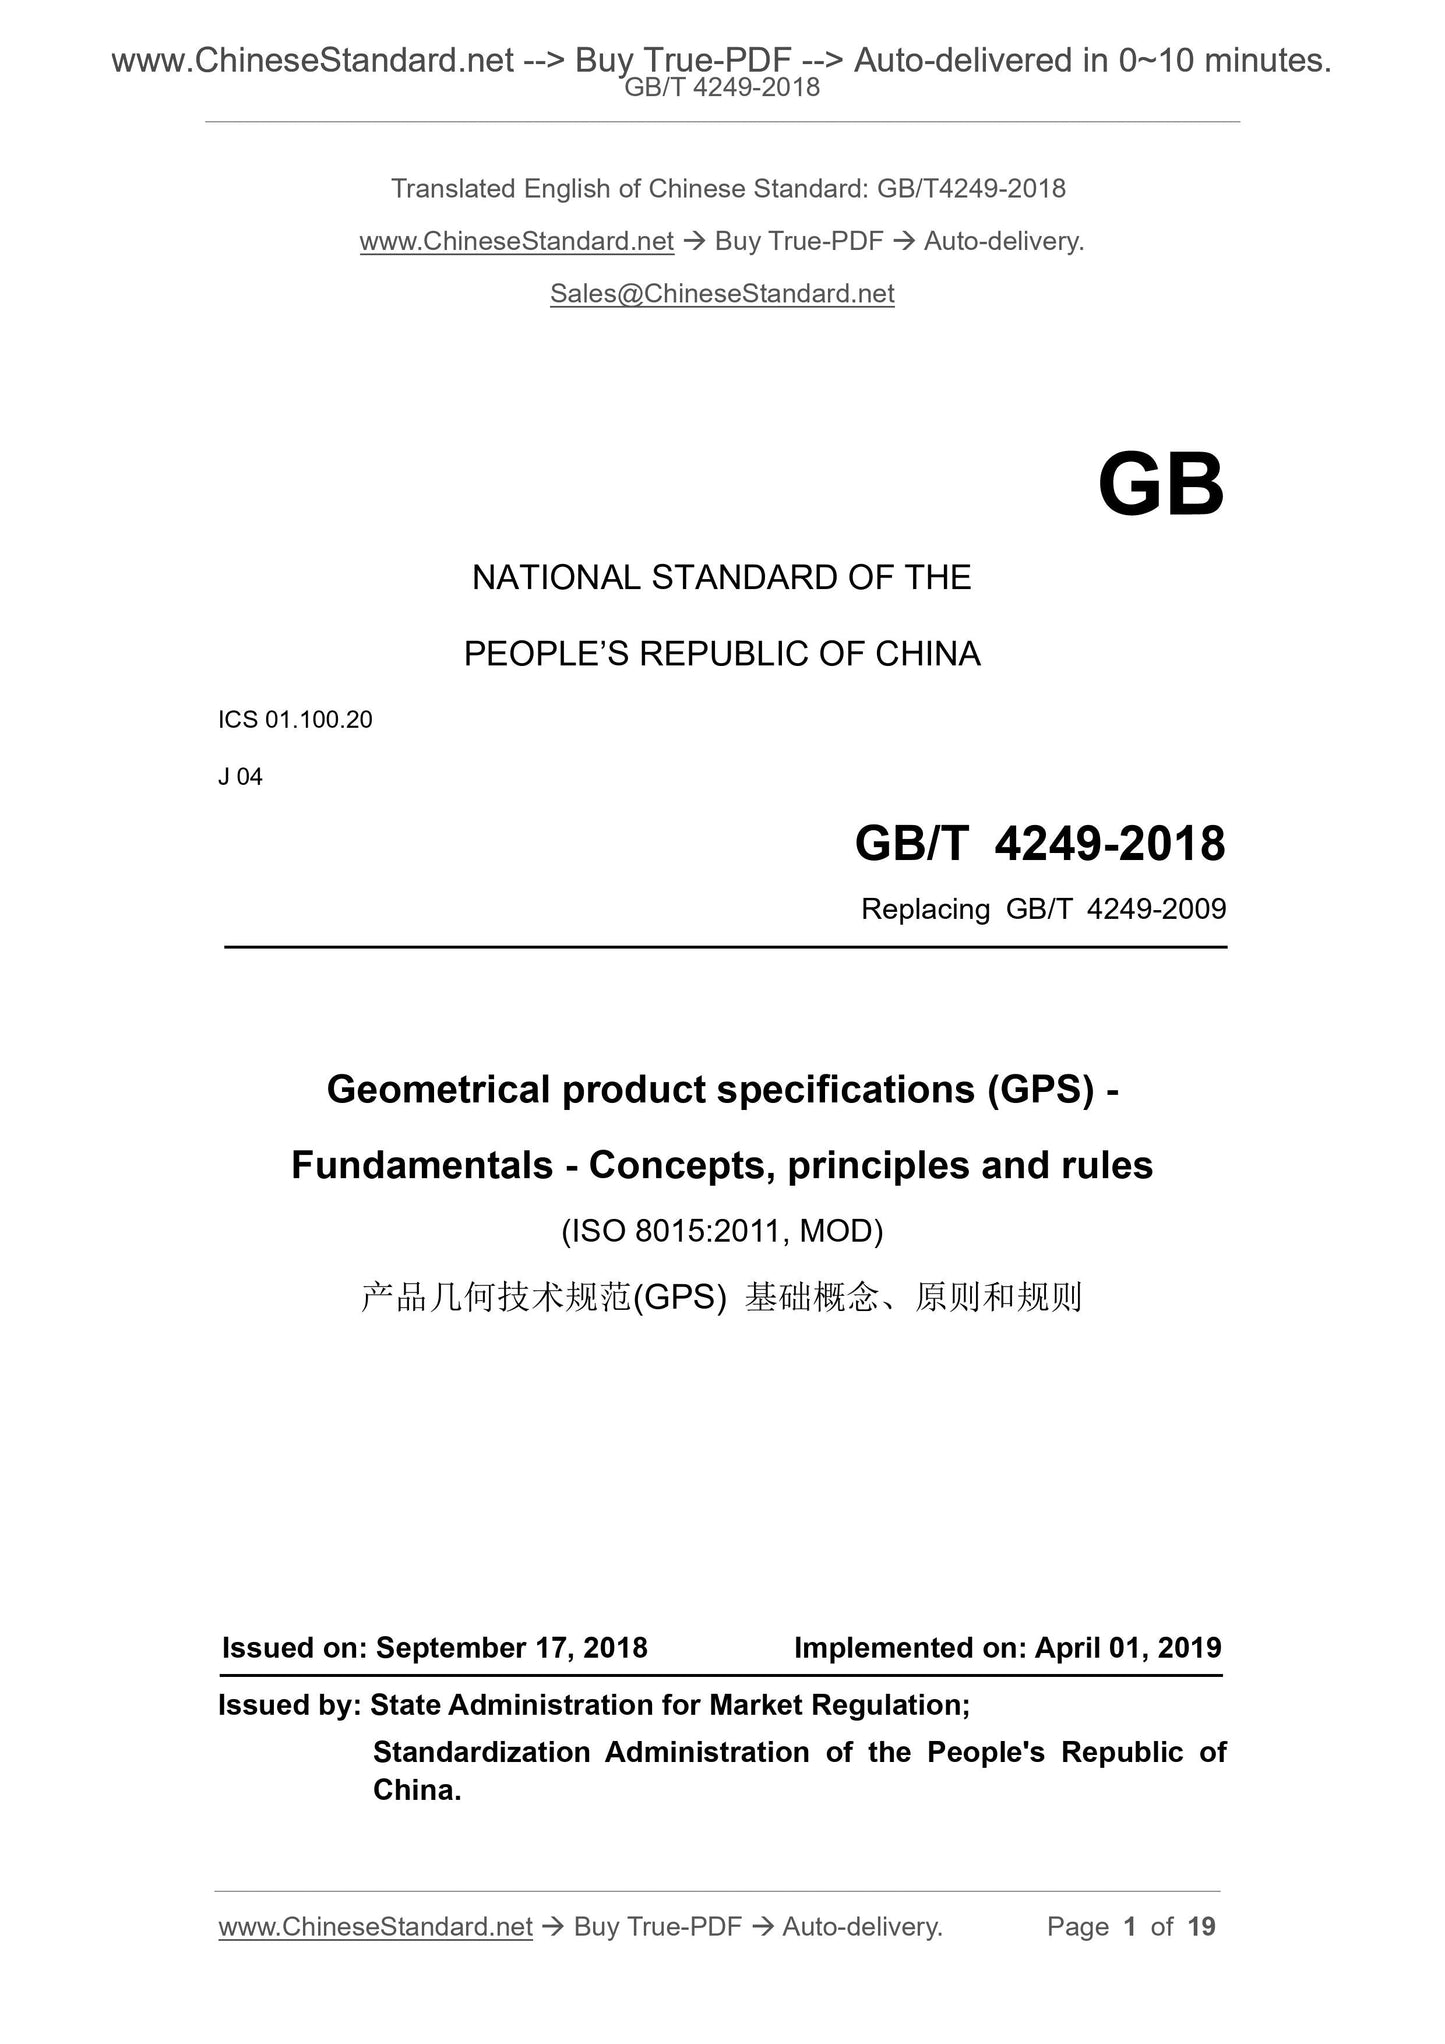 GB/T 4249-2018 Page 1